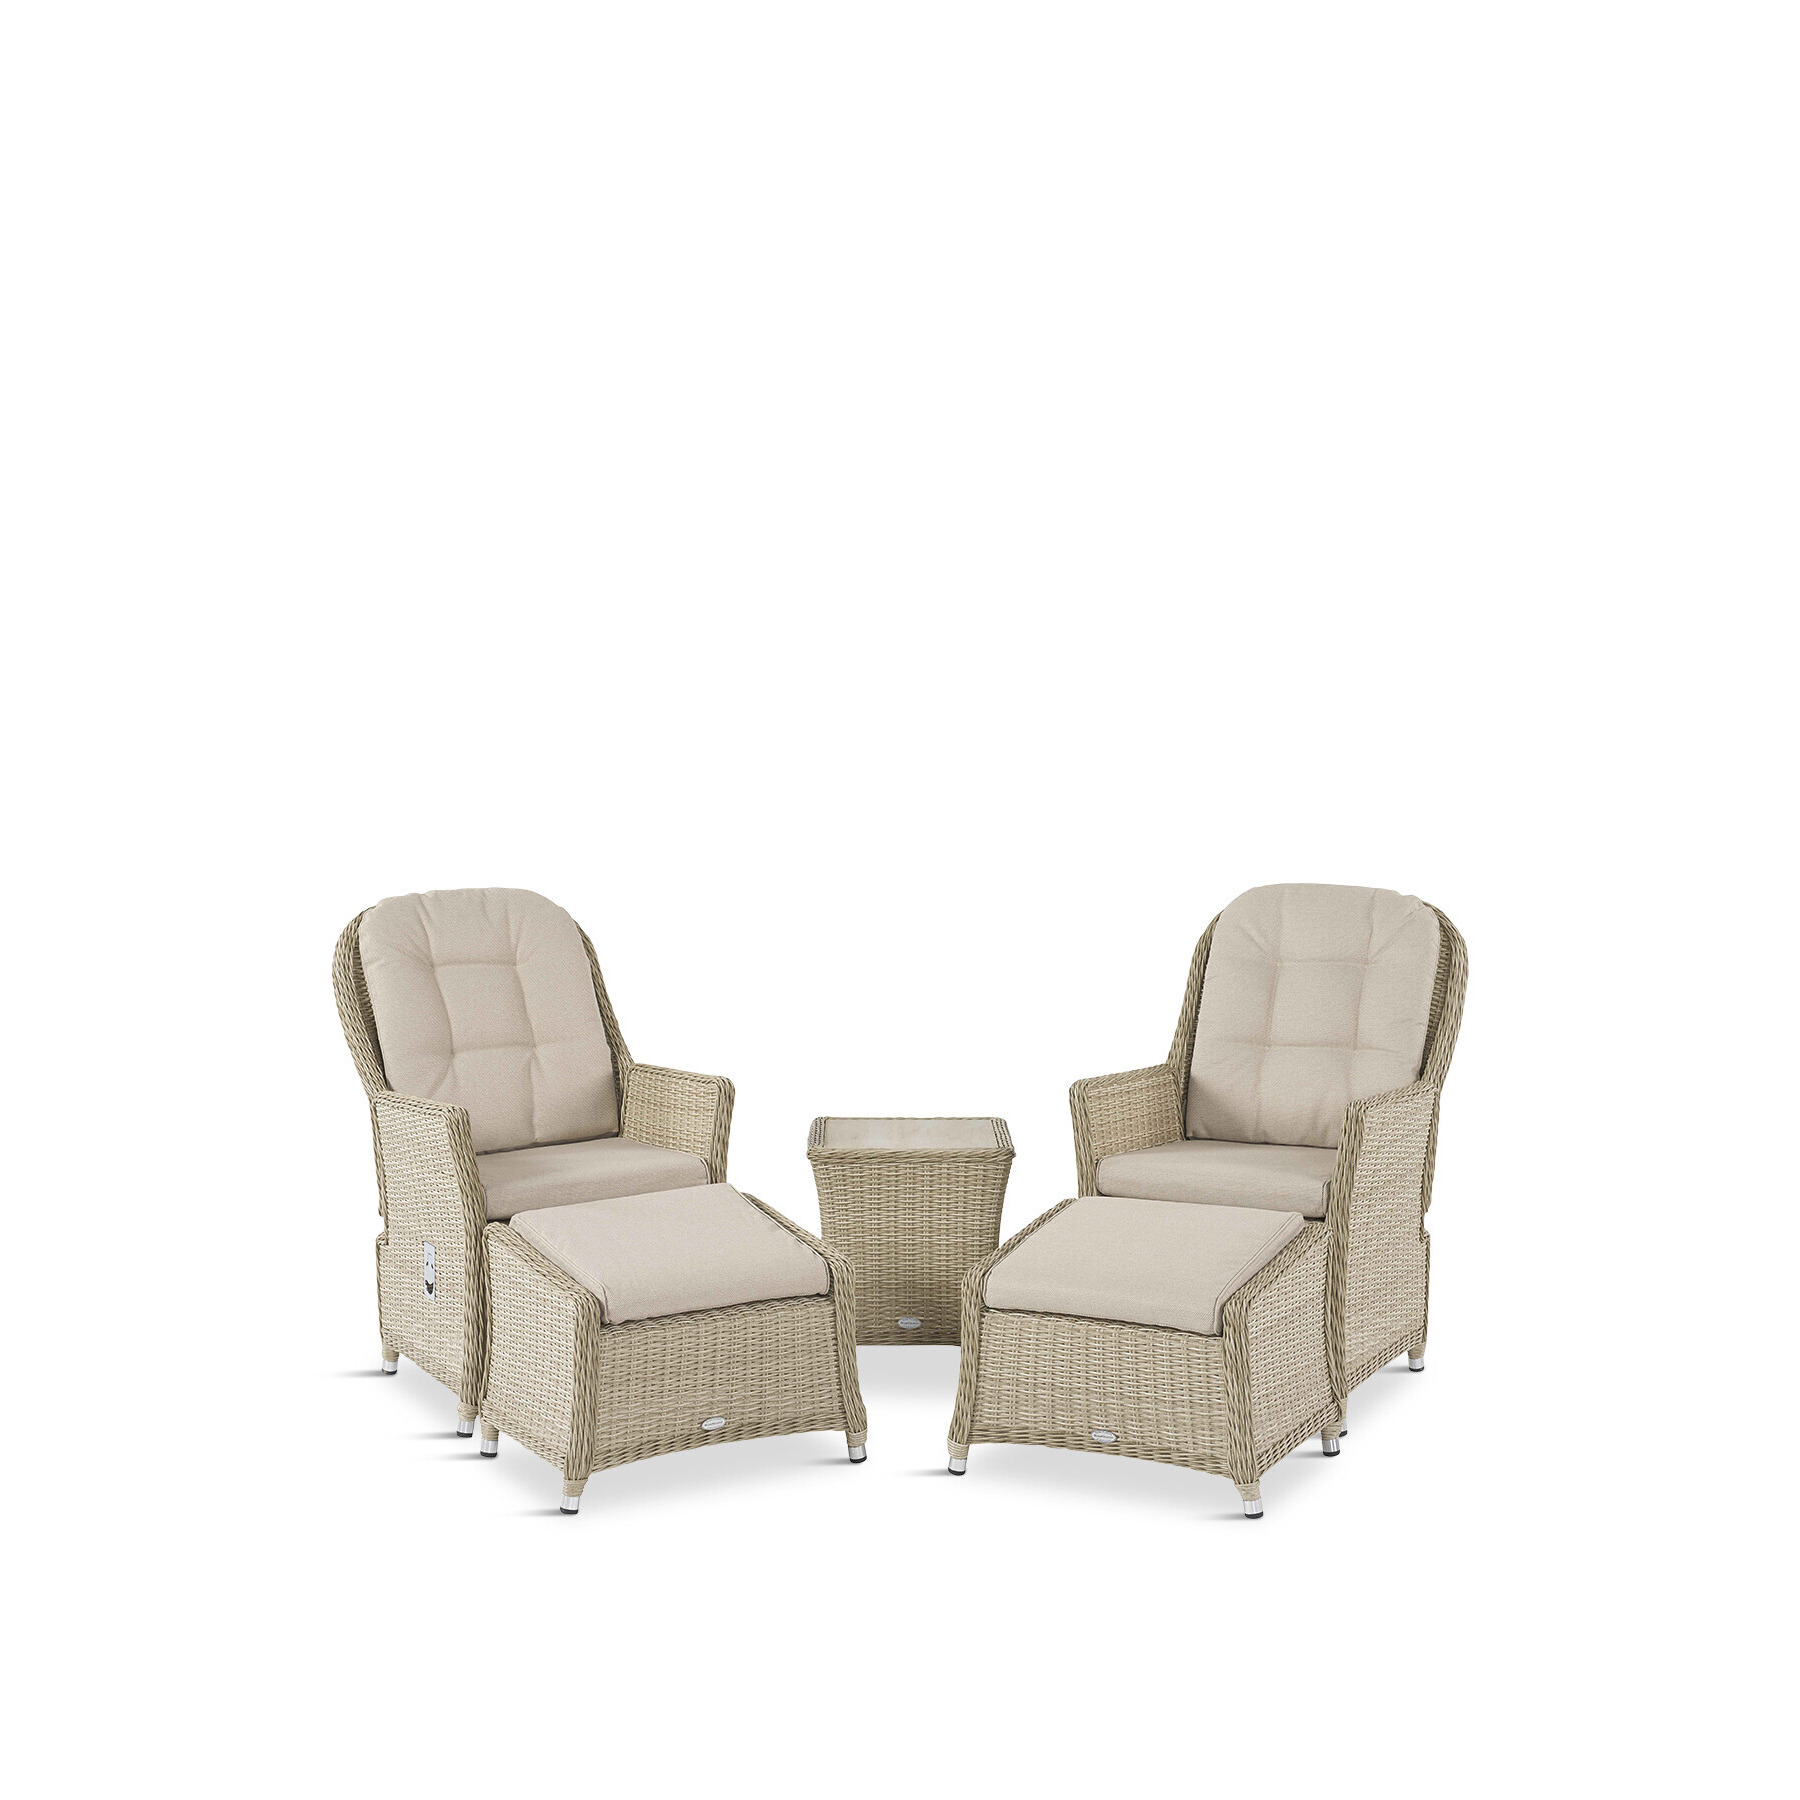 Bramblecrest Monterey Recliner Set with 2 Recliner Chairs, 2 Footstools & Side Table Neutral - image 1